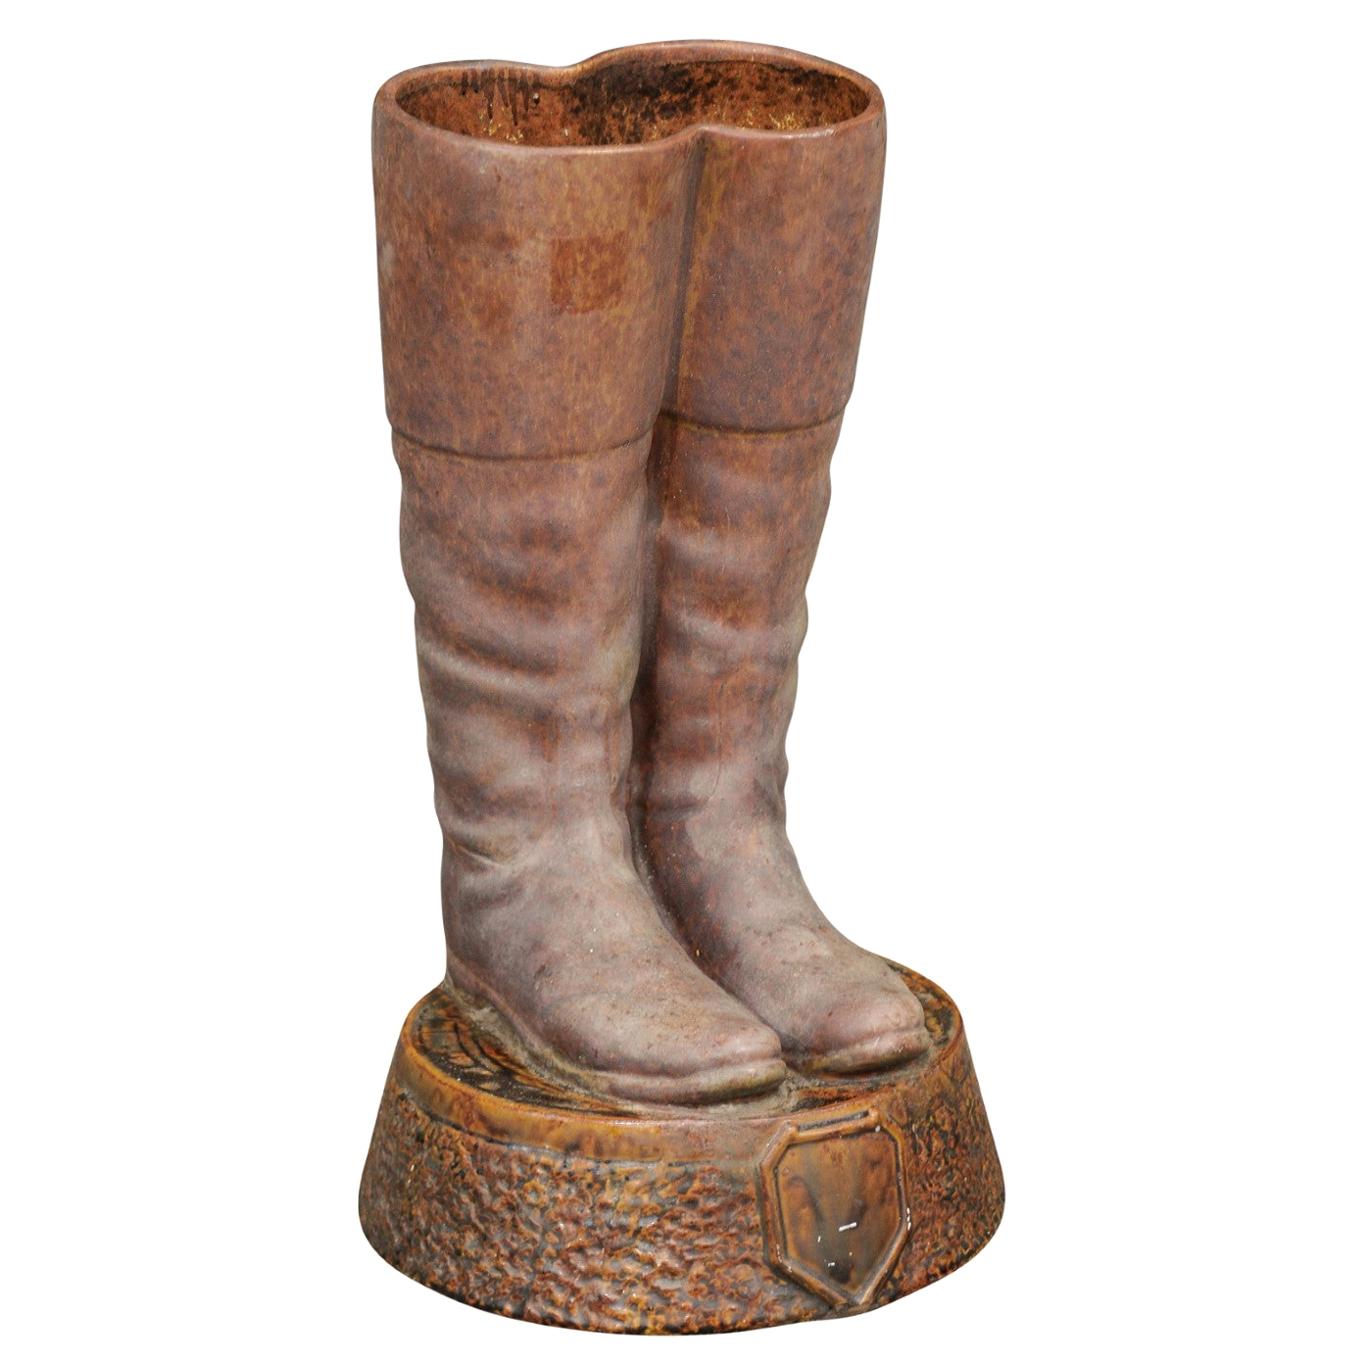 Terracotta Umbrella Stand Depicting a Pair of Brown Riding Boots on Base